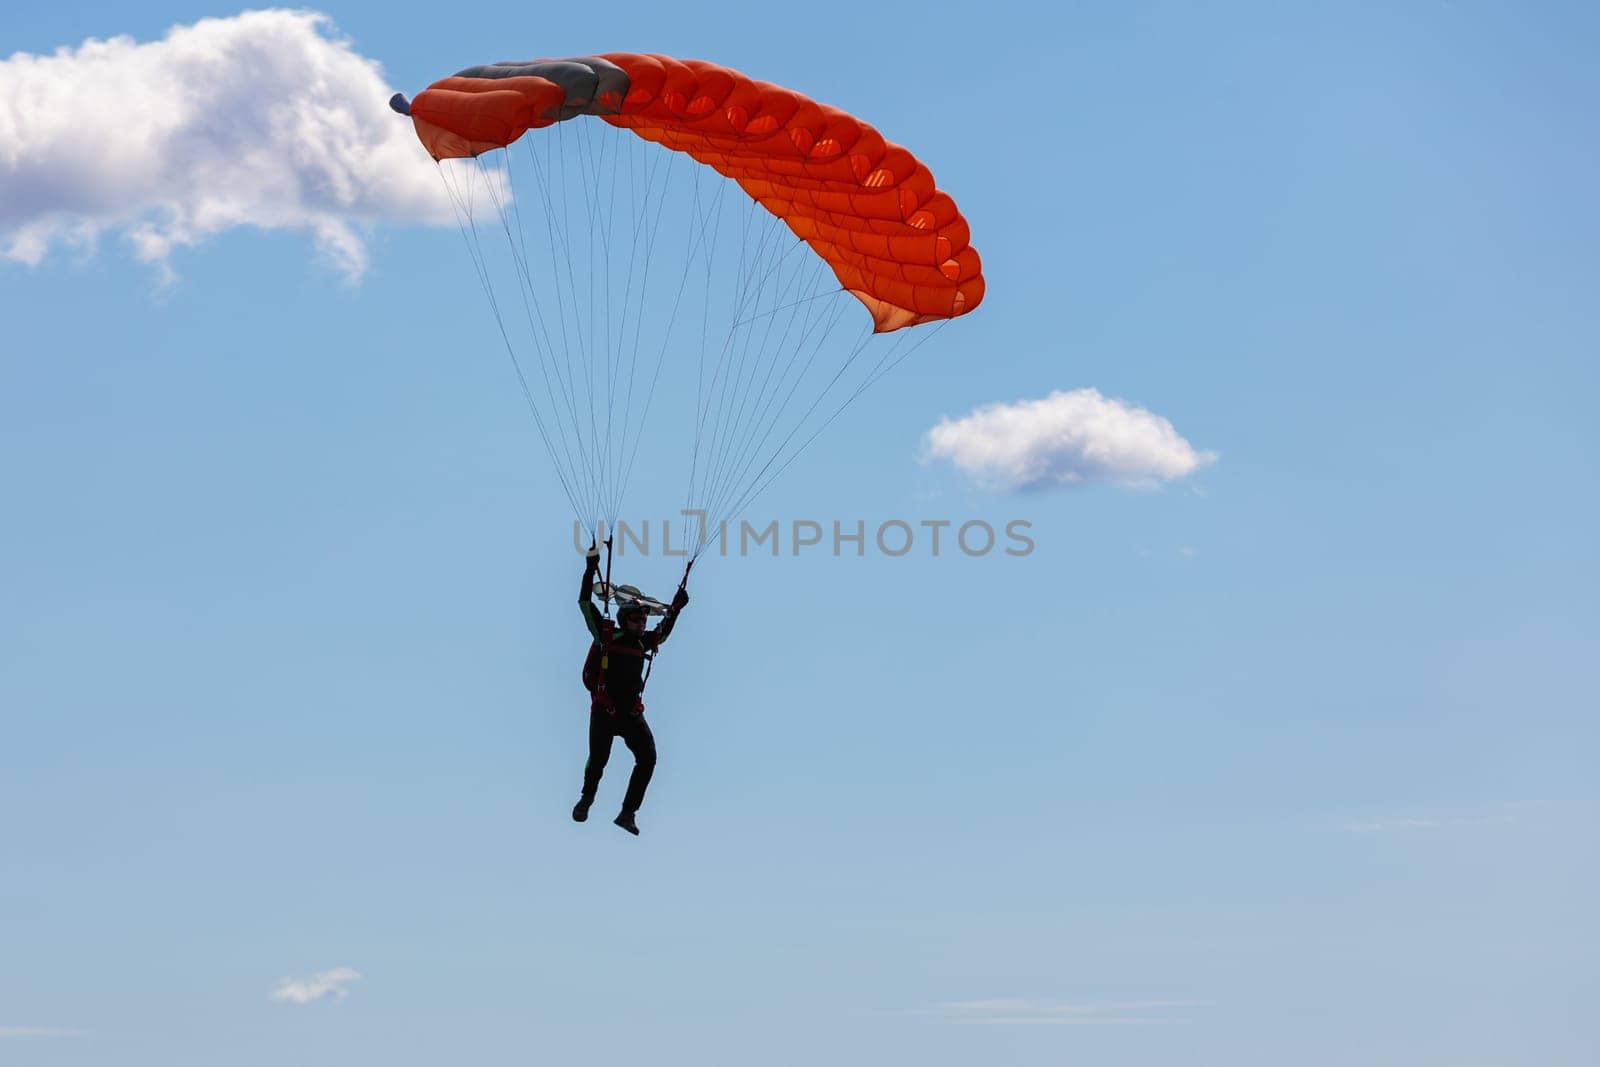 Parachute in the sky. Skydiver is flying a parachute in the blue sky by Yurich32